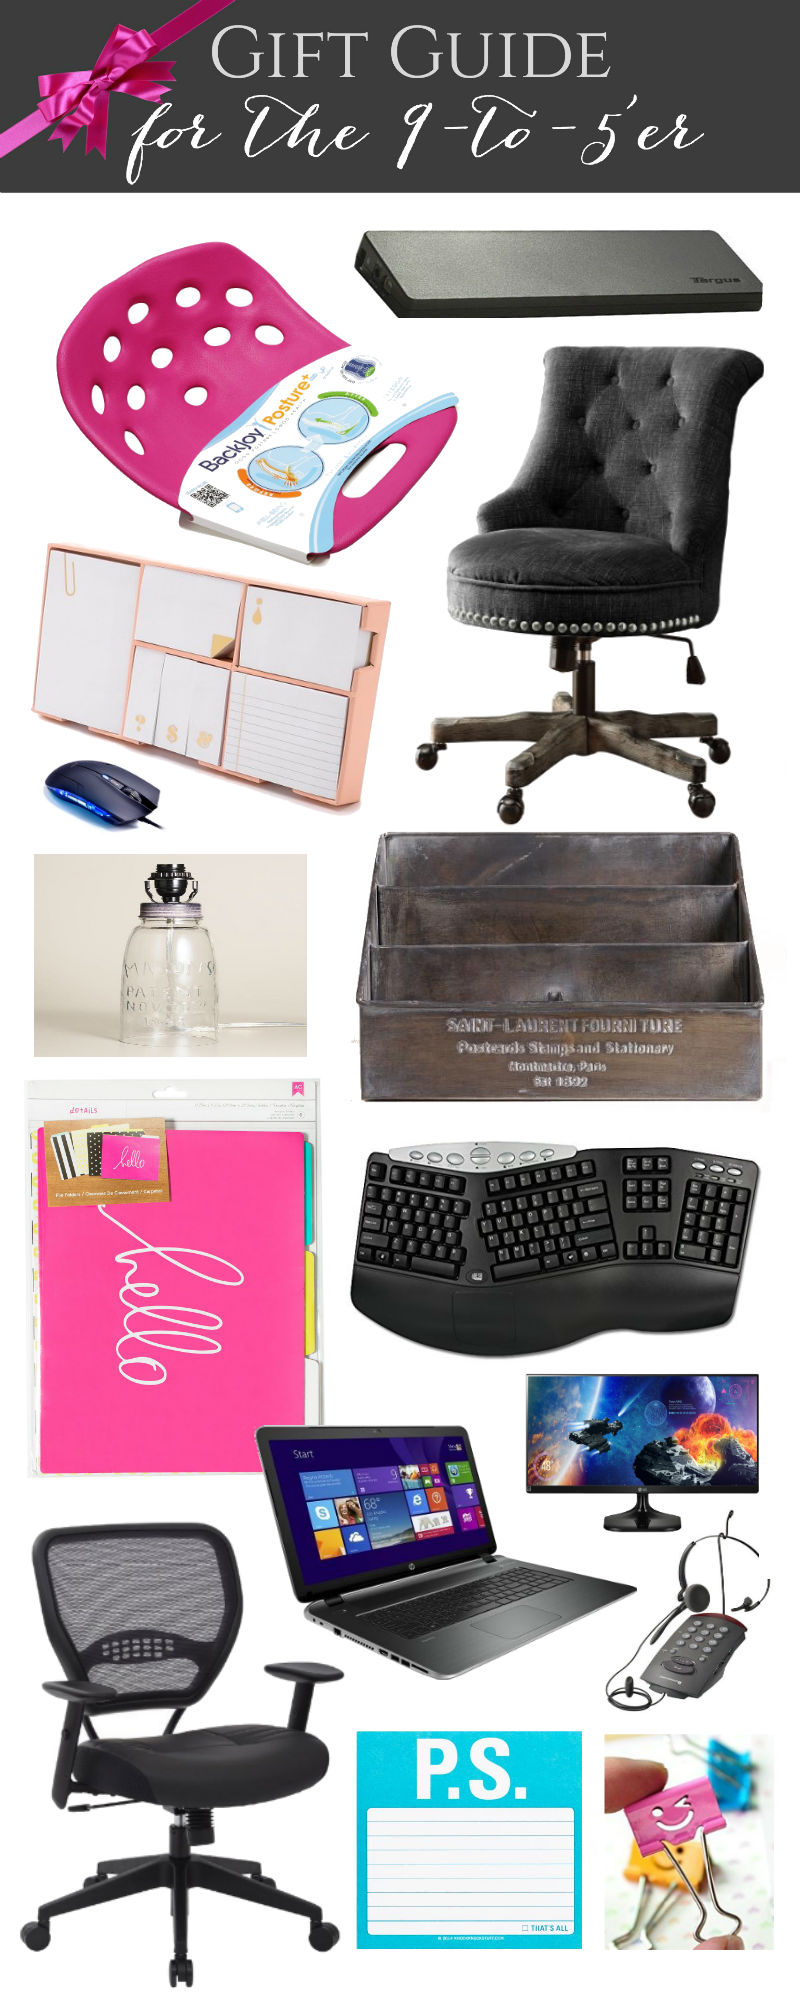 Gift Guide for the 9 to 5er with Happily Ever After Etc! $50 Giveaway!